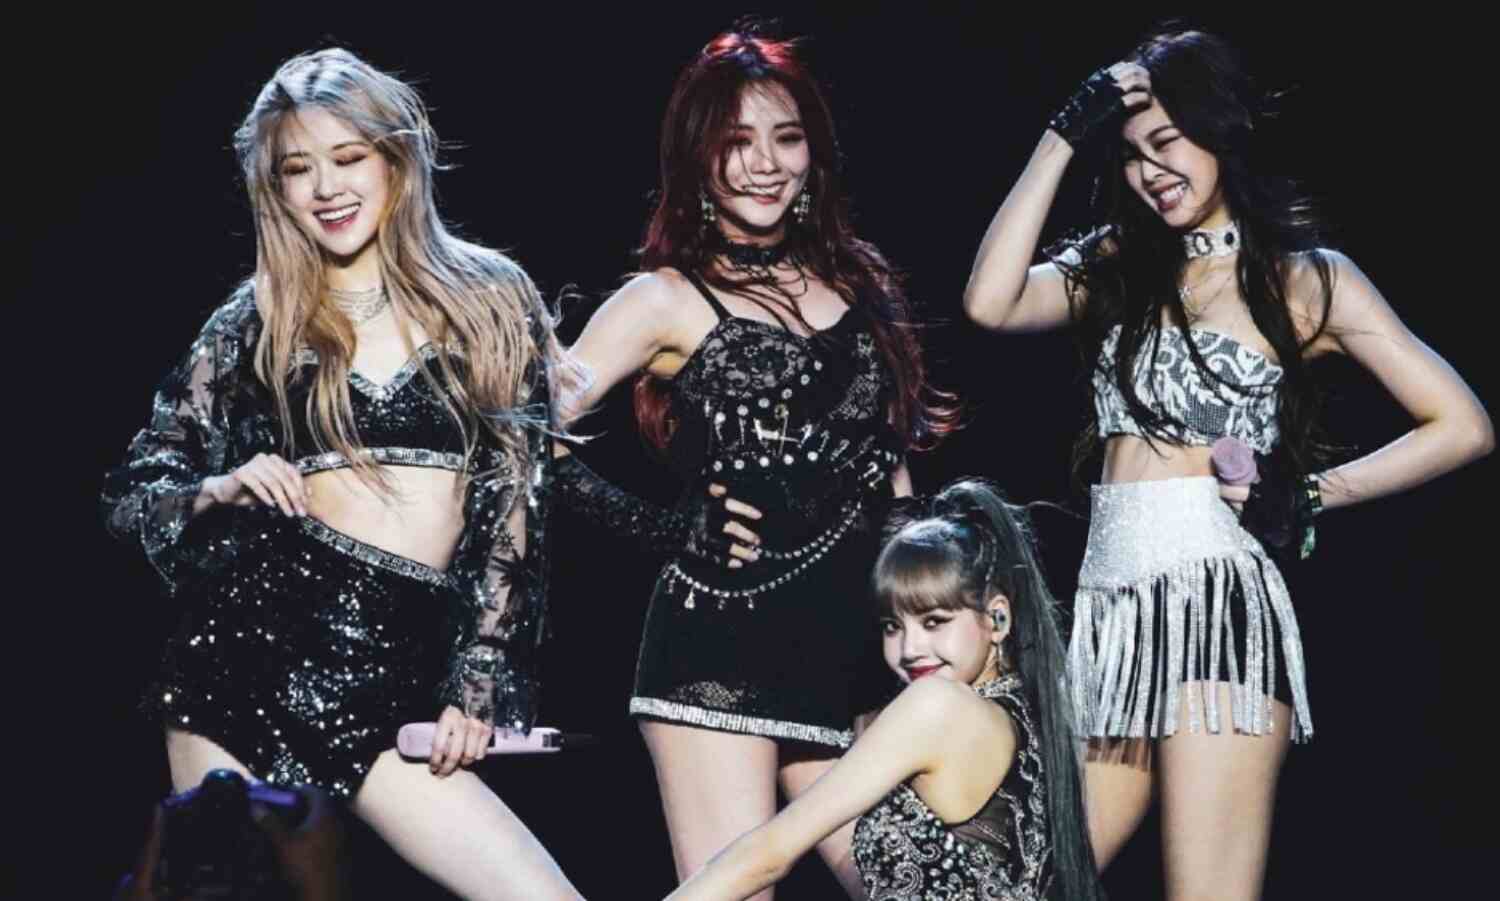 BLACKPINK could perform at US state dinner for President of S Korea